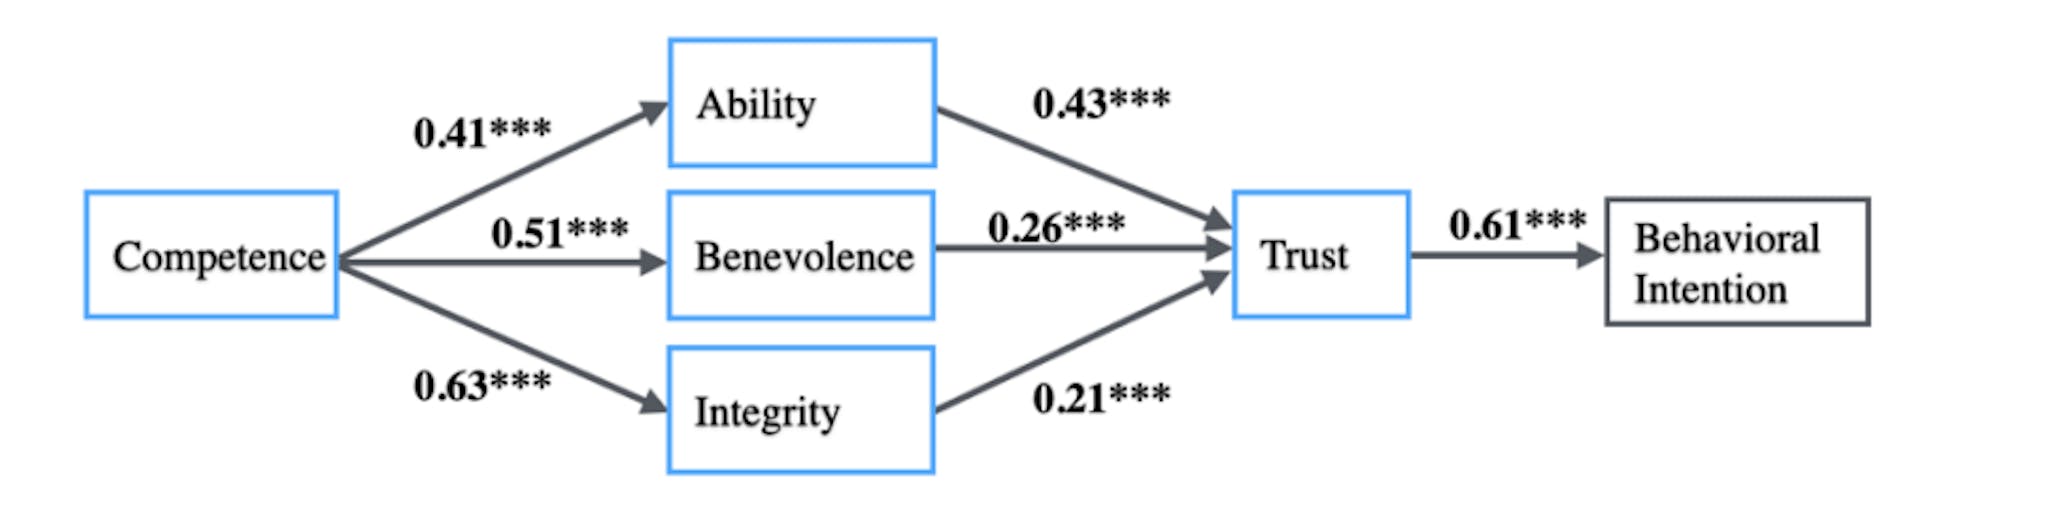 Fig. 5. Serial Parallel Mediator Model (Competence - Trustworthiness constructs - Trust - Behavioral intention).